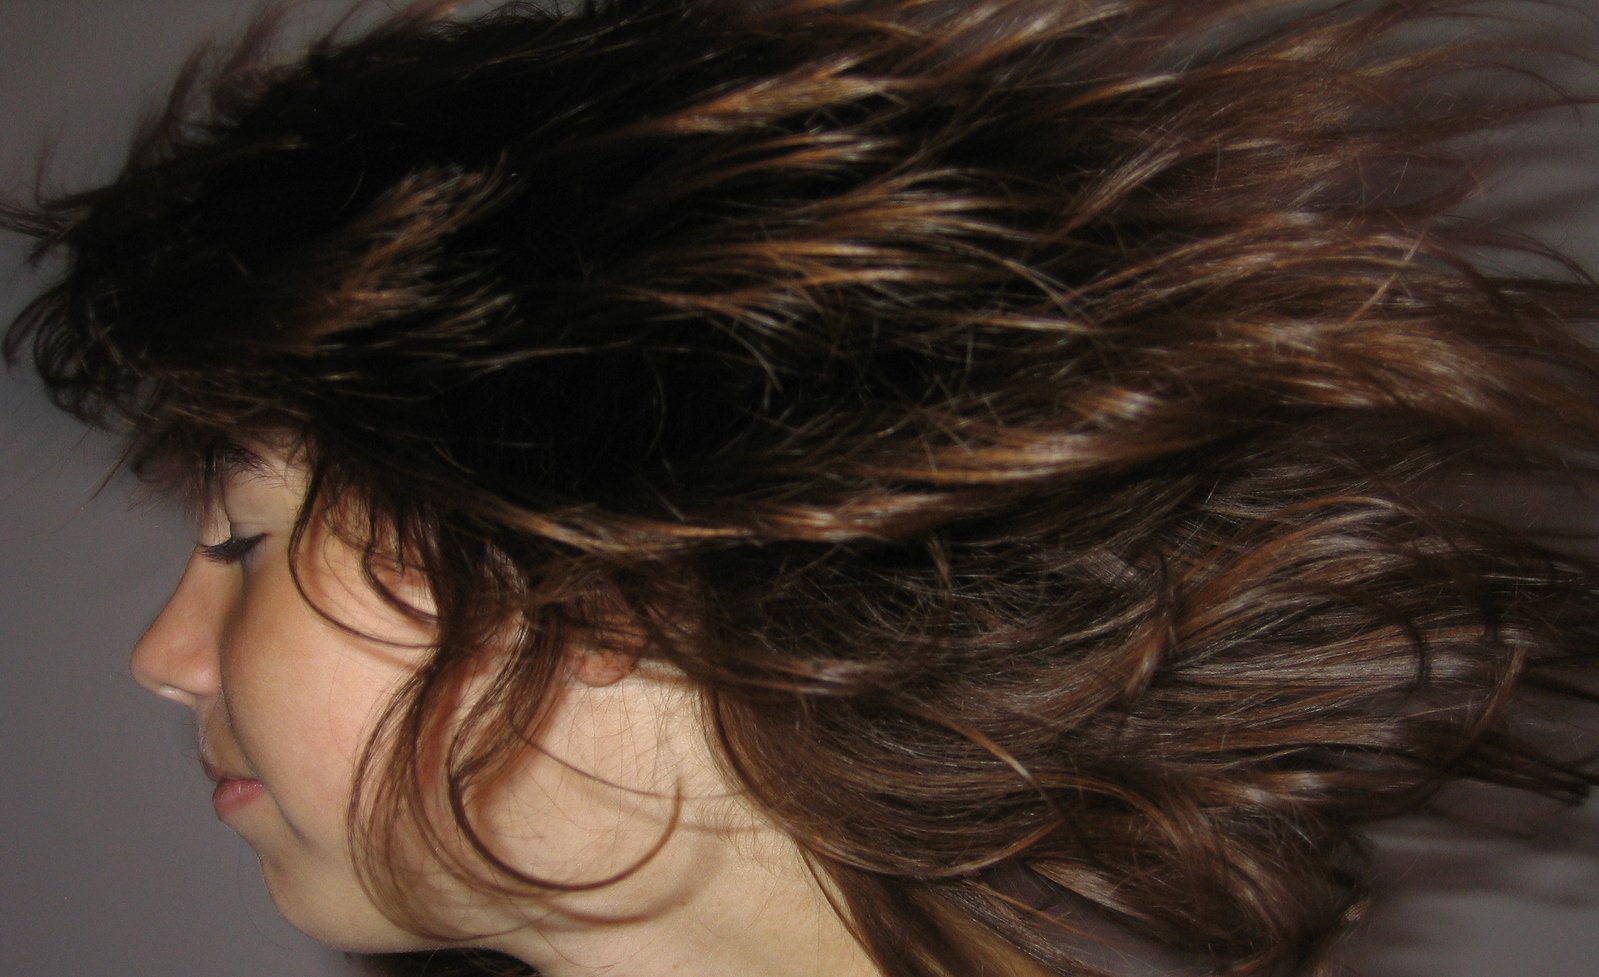 the back side of a women's head with some hair flowing